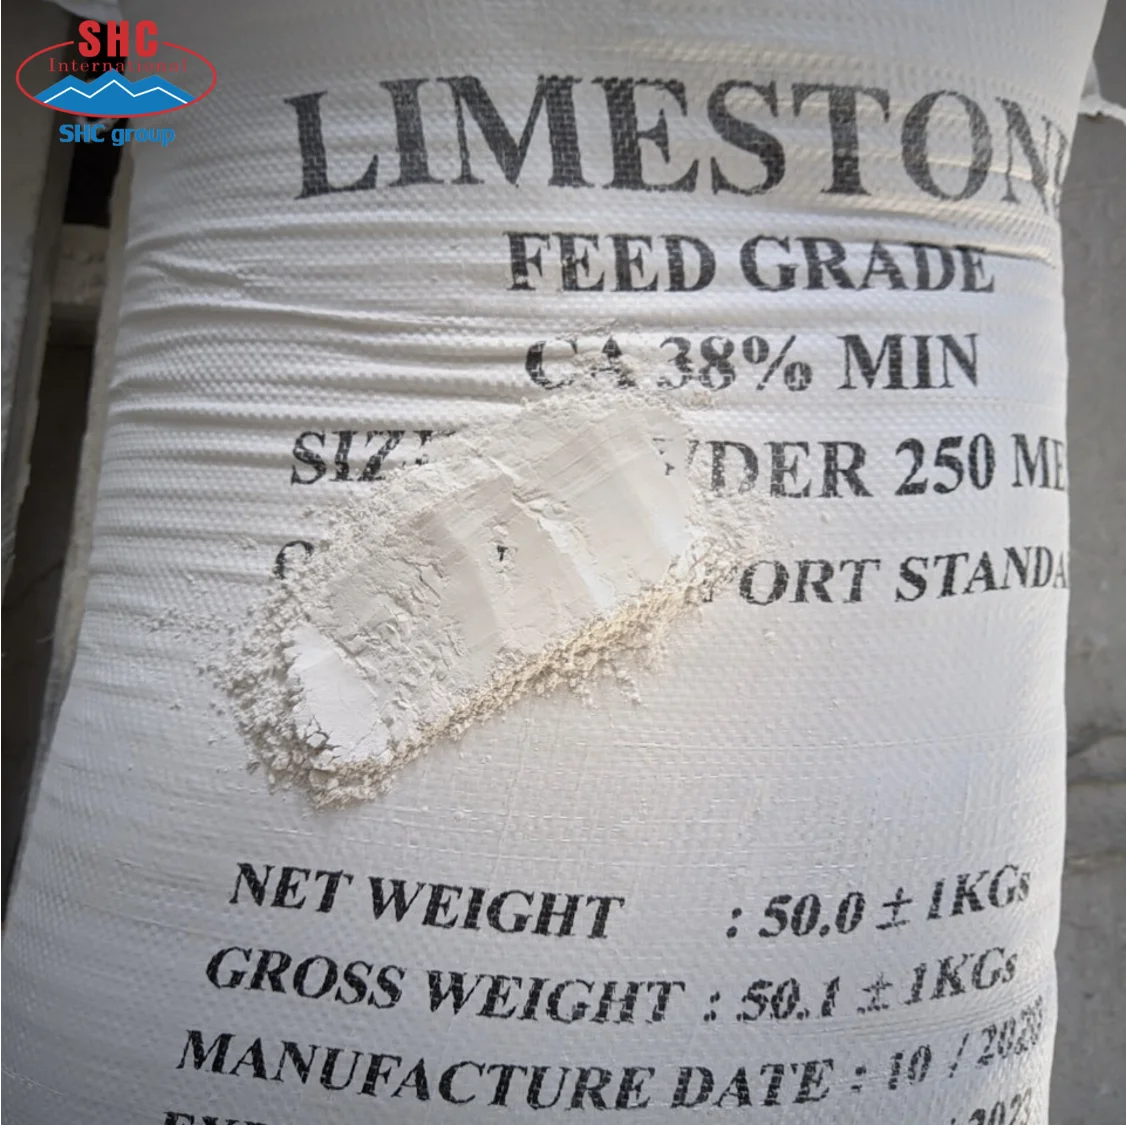 Whole Sale Limestone Powder For Feed Animal - Buy Limestone Feed Grade For  Chicken Layer Broiler Cattle Feed Additives,Cheap Limestone Granular  Limestone Powder,Limestone Powder For Feed Animal Product on 